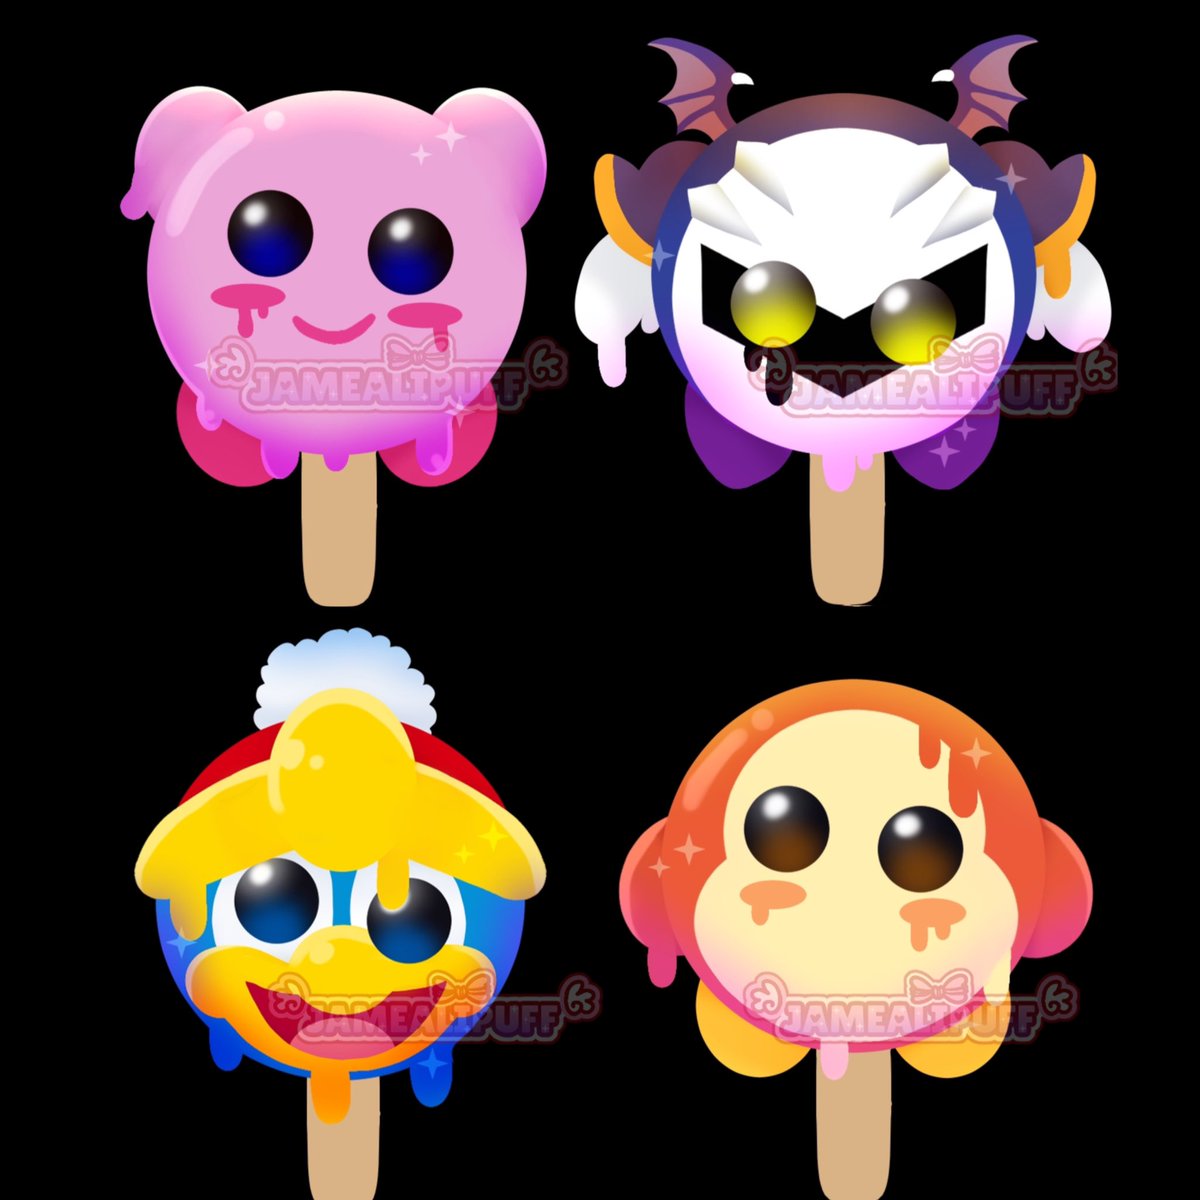 I call them: poyo pops! 
had an idea for popsicle keychains so why not kirbyfy those ice creams that always melt fast and make the gumball eyes go wonky. already placed an order for them, stay tuned!!
#kirby #kirbyfanart #kirbystarallies #metaknight #kingdeedeedee #waddledee